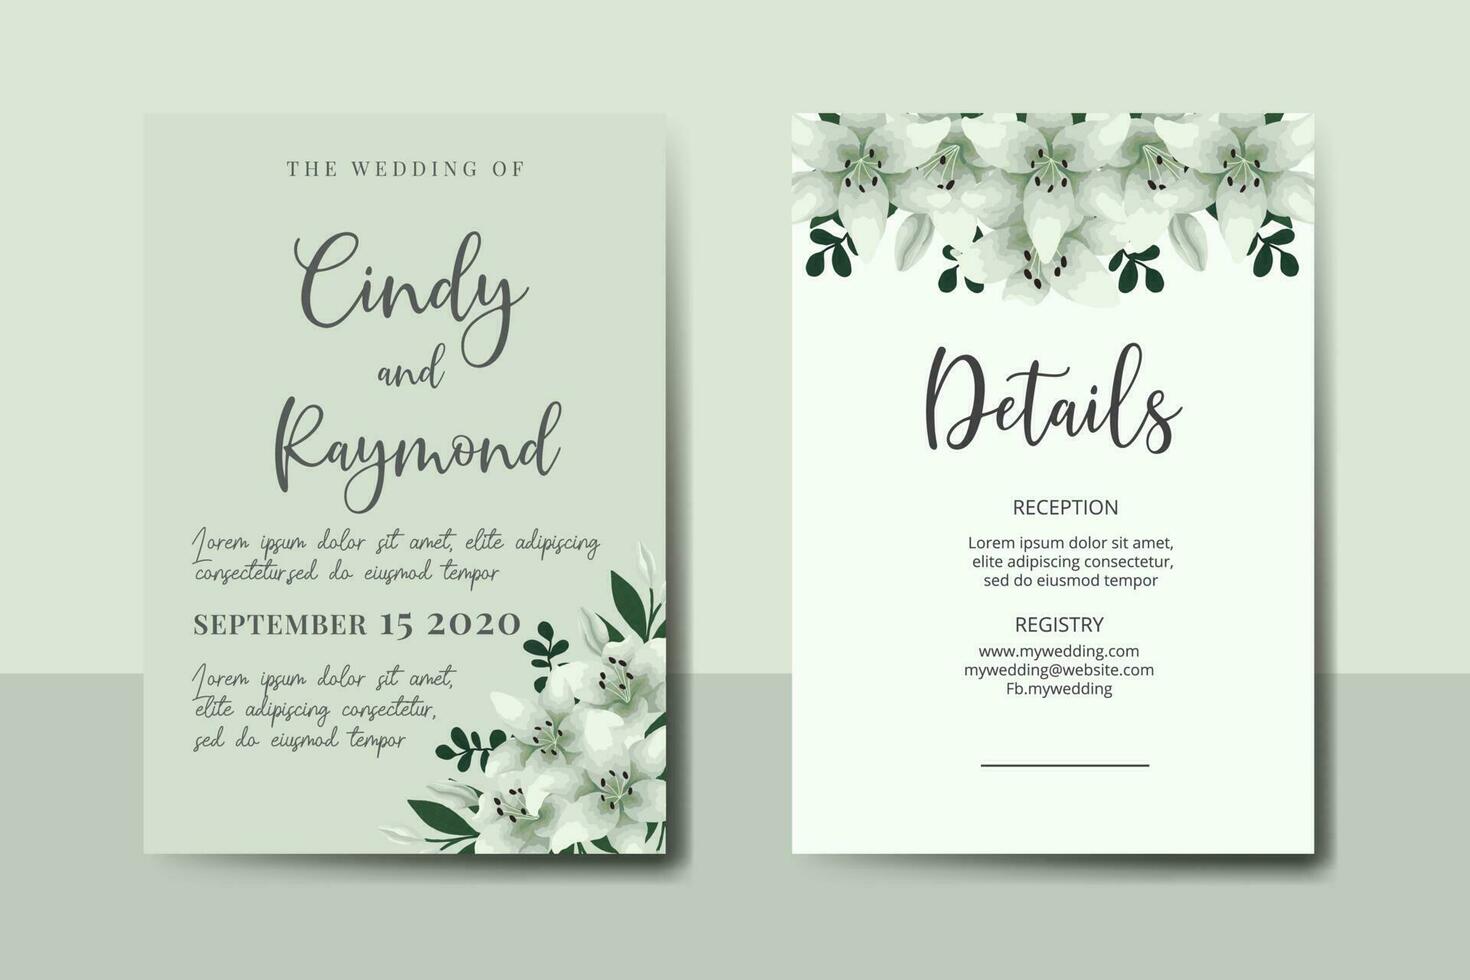 Wedding invitation frame set, floral watercolor Digital hand drawn White Lily Flower design Invitation Card Template vector